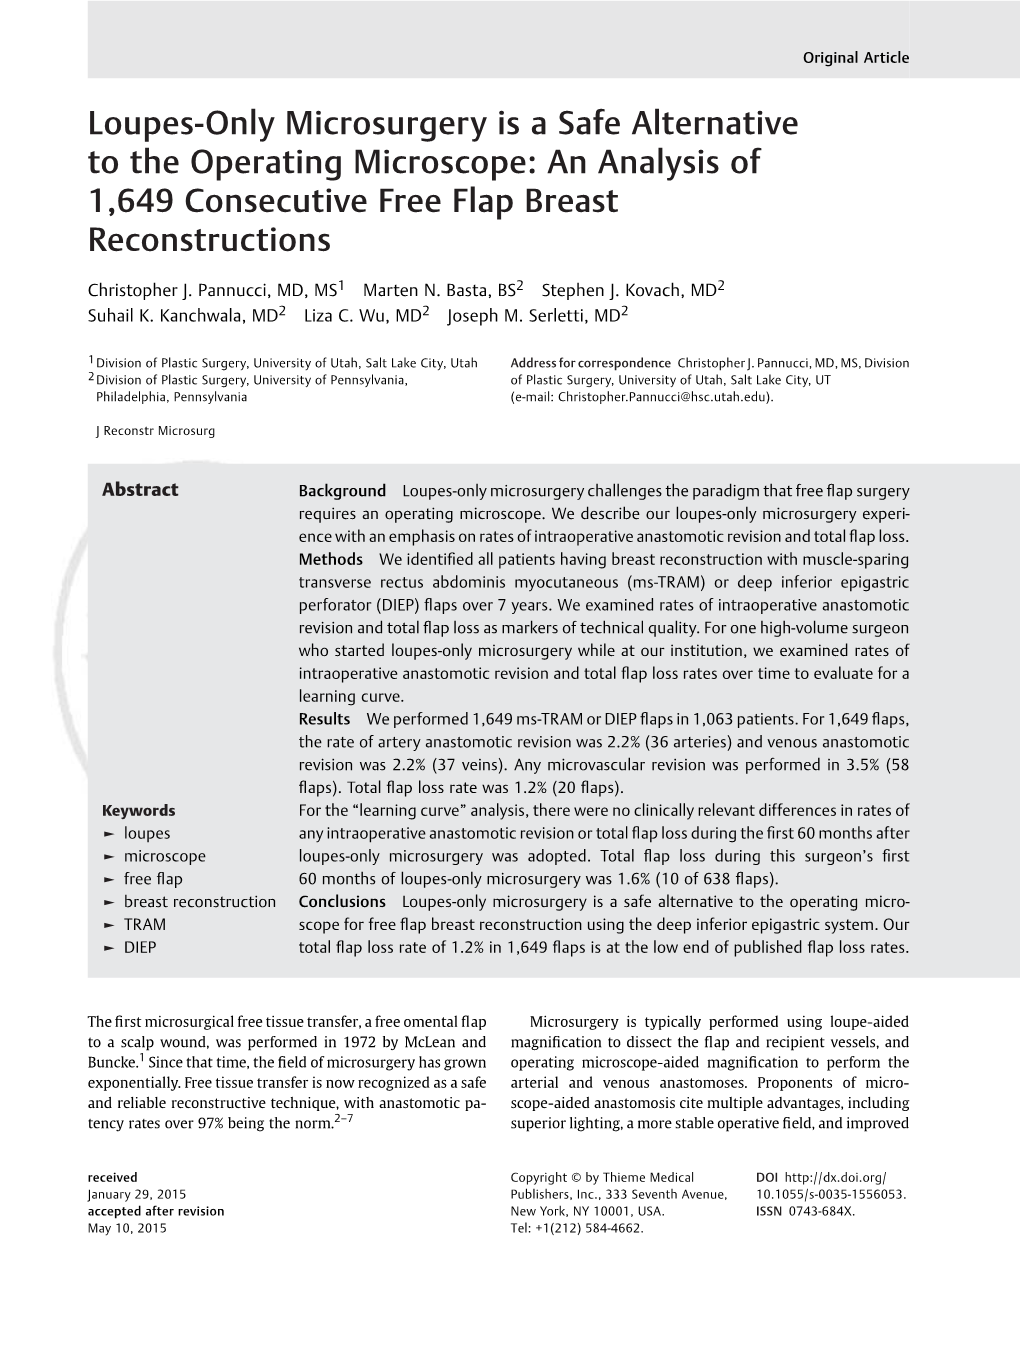 Loupes-Only Microsurgery Is a Safe Alternative to the Operating Microscope: an Analysis of 1,649 Consecutive Free Flap Breast Reconstructions